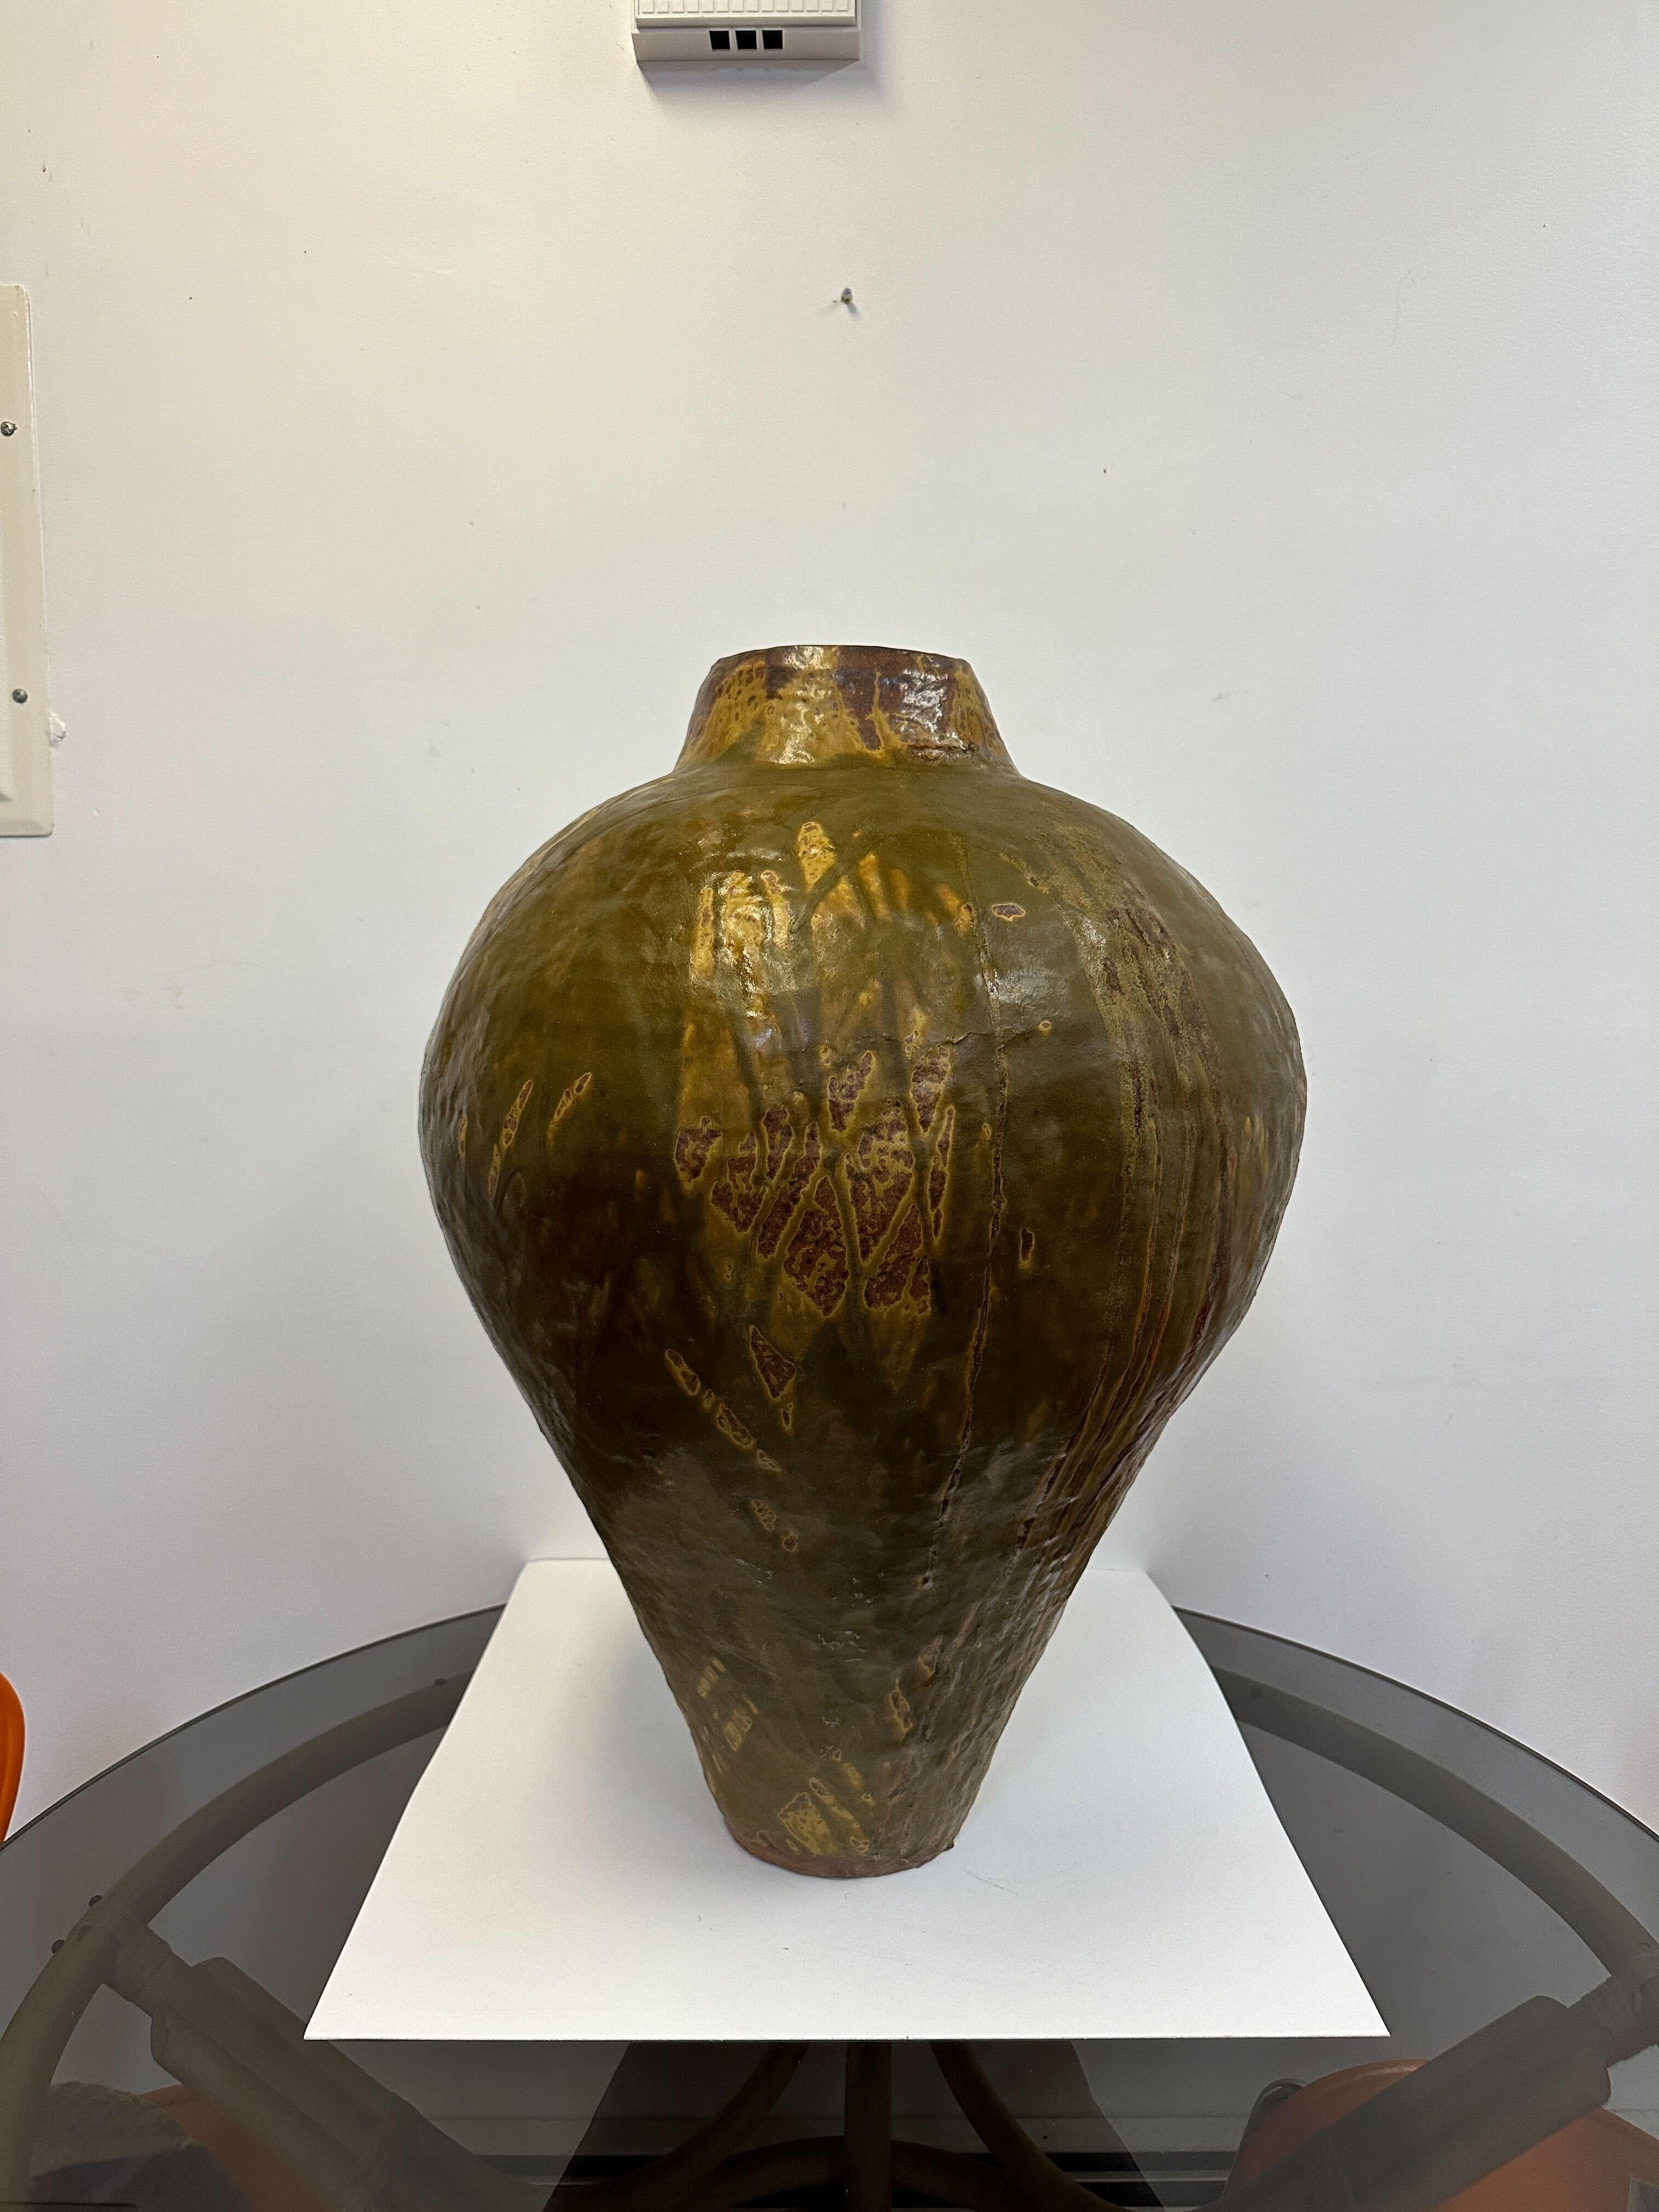 This beautiful large vessel is in very good overall condition. Resembling and in they style of Toshiko Takaezu, this work was acquired in the New Hope, PA area with the artist being unknown. Work presents well.